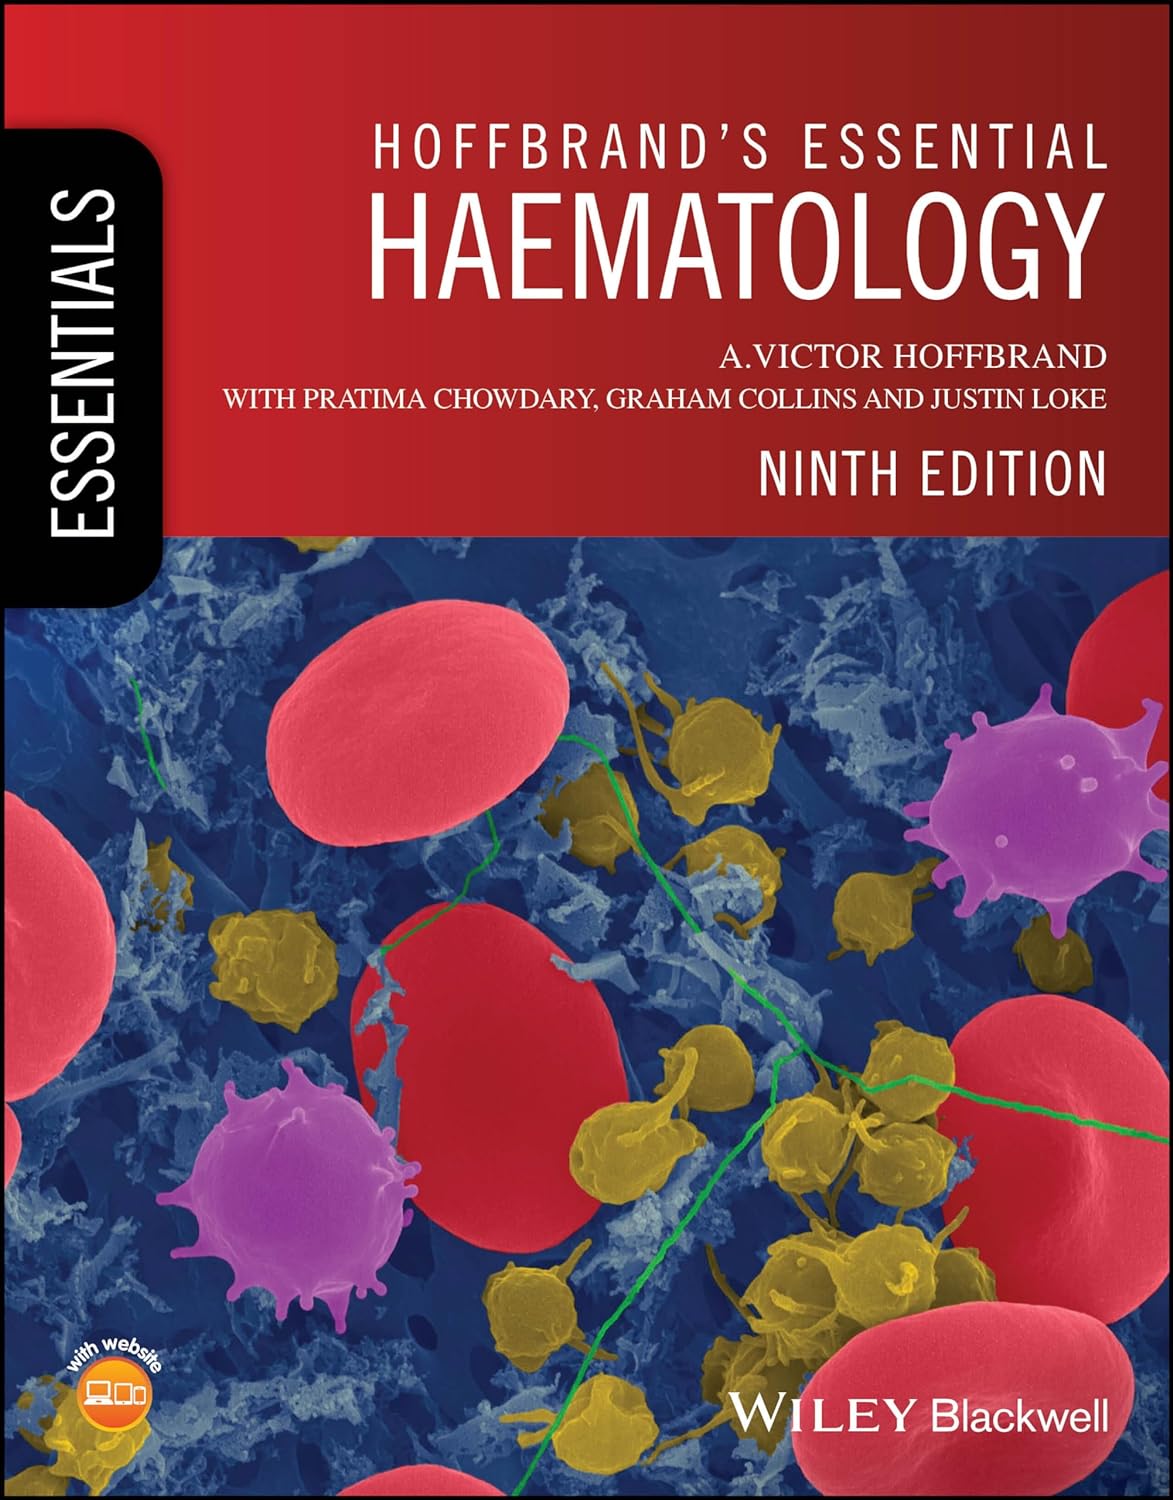 (EBook PDF)Hoffbrand s Essential Haematology, 9th edition by A. Victor Hoffbrand, Pratima Chowdary, Graham P. Collins, Justin Loke